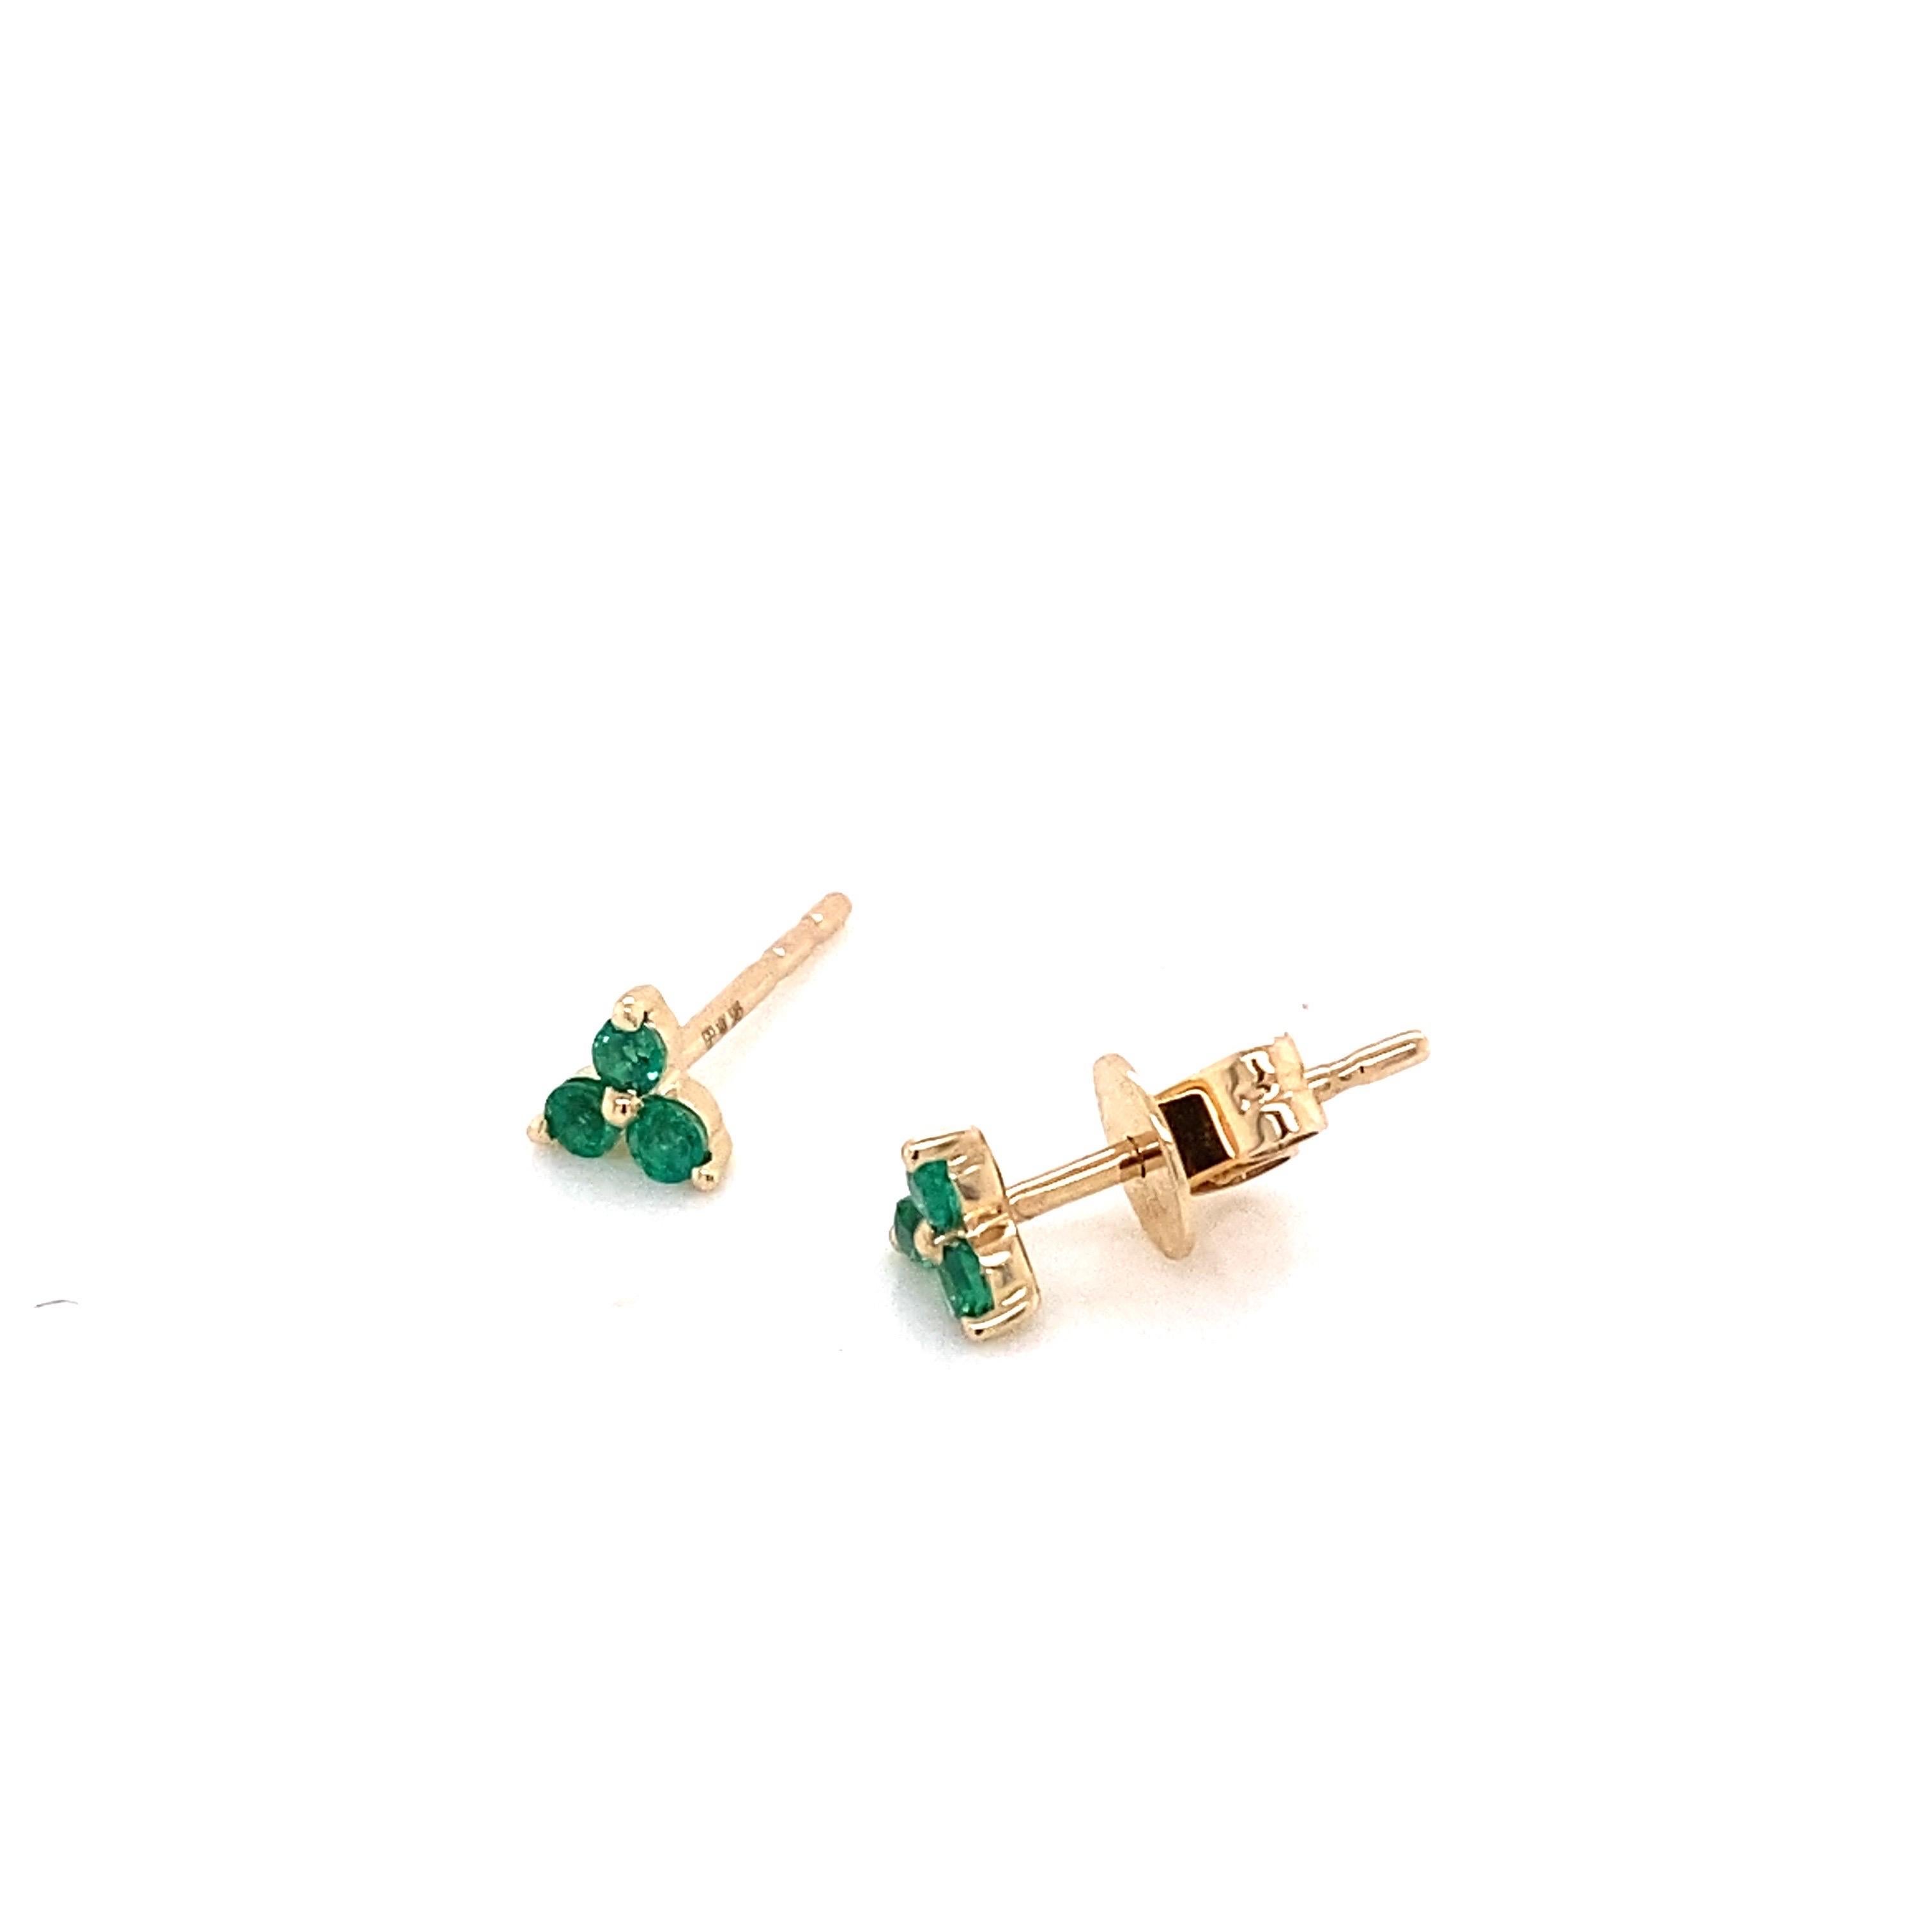 These petite earrings feature a trio of emeralds set in 14 karat yellow gold. Friction post with butterfly back. Perfect to wear together or layer with other earrings. 
Measurements: 5mm x 4mm